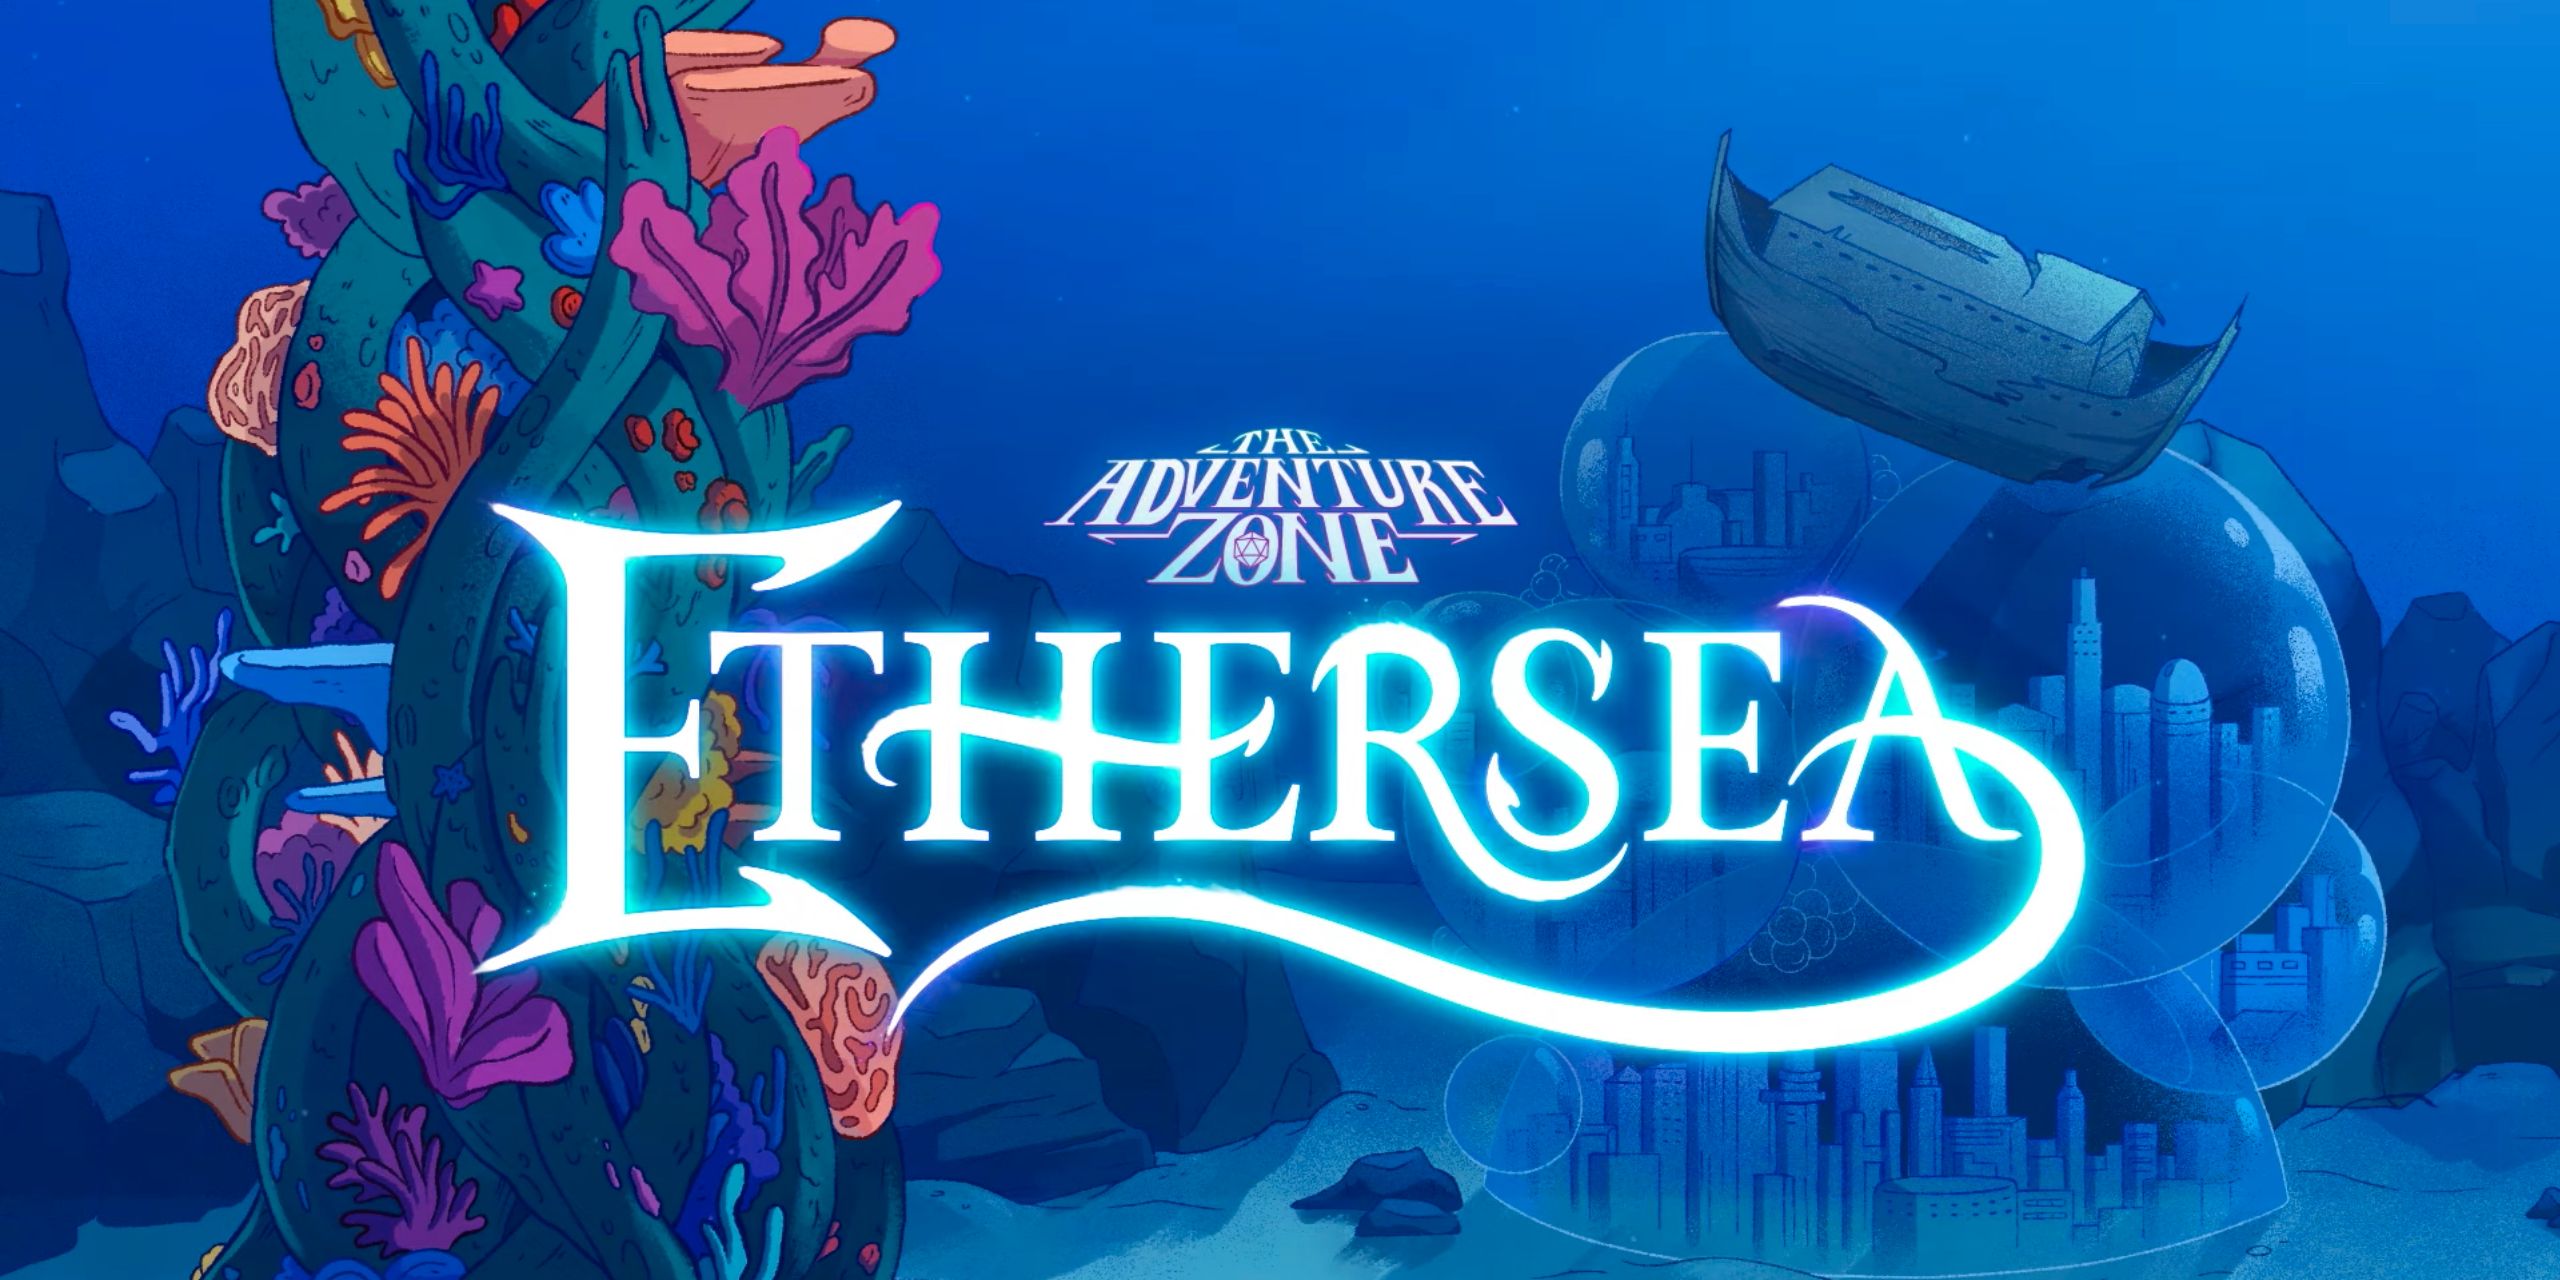 The Adventure Zone: Ethersea logo. (The McElroy Family, 2021)